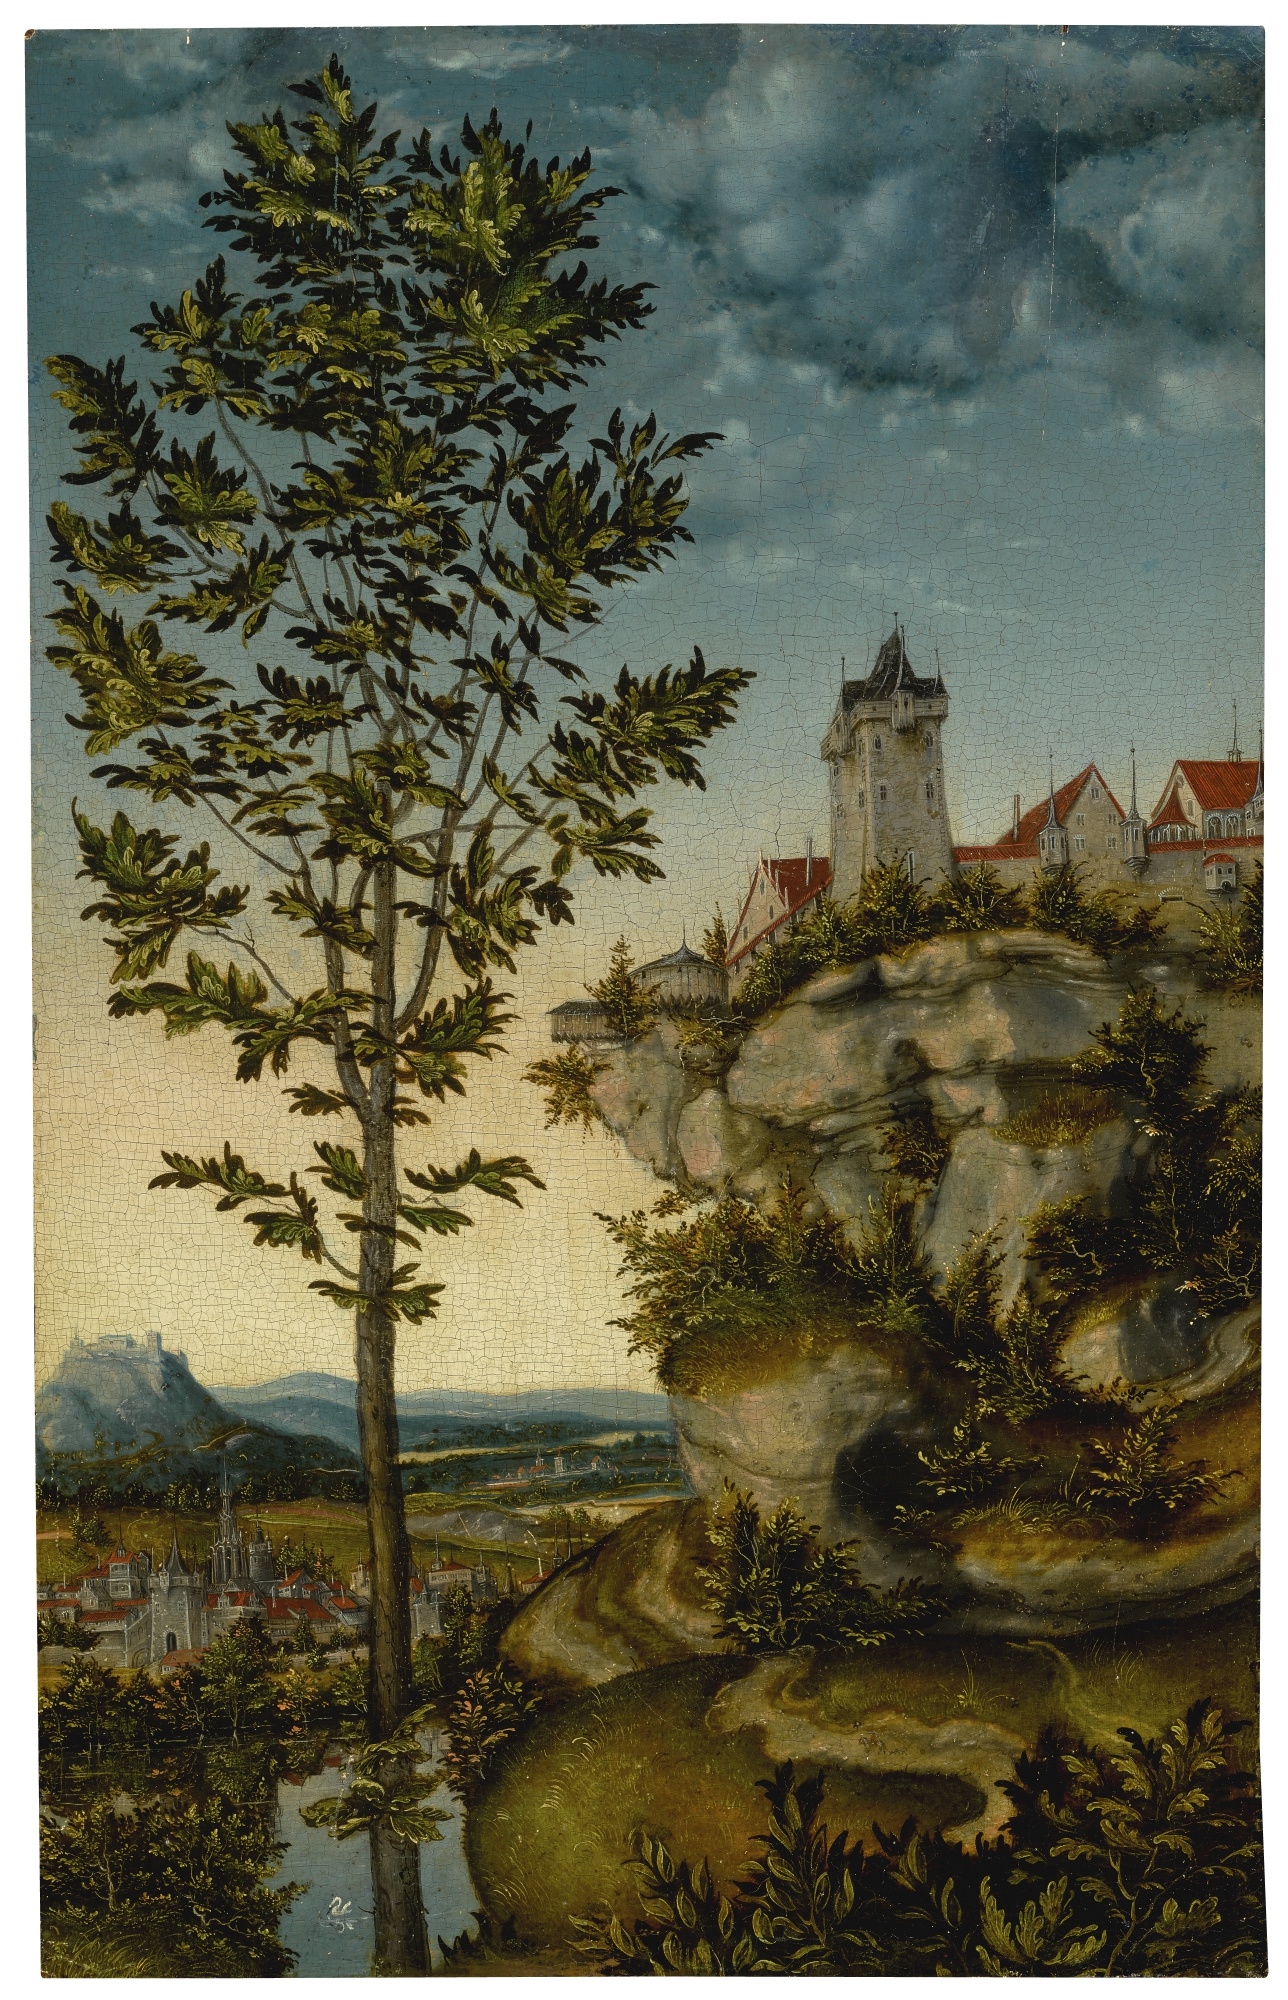 LANDSCAPE WITH FORTIFIED BUILDINGS ON A ROCKY BLUFF, A TREE IN THE LEFT FOREGROUND AND A DISTANT VIEW OF A TOWN BEYOND